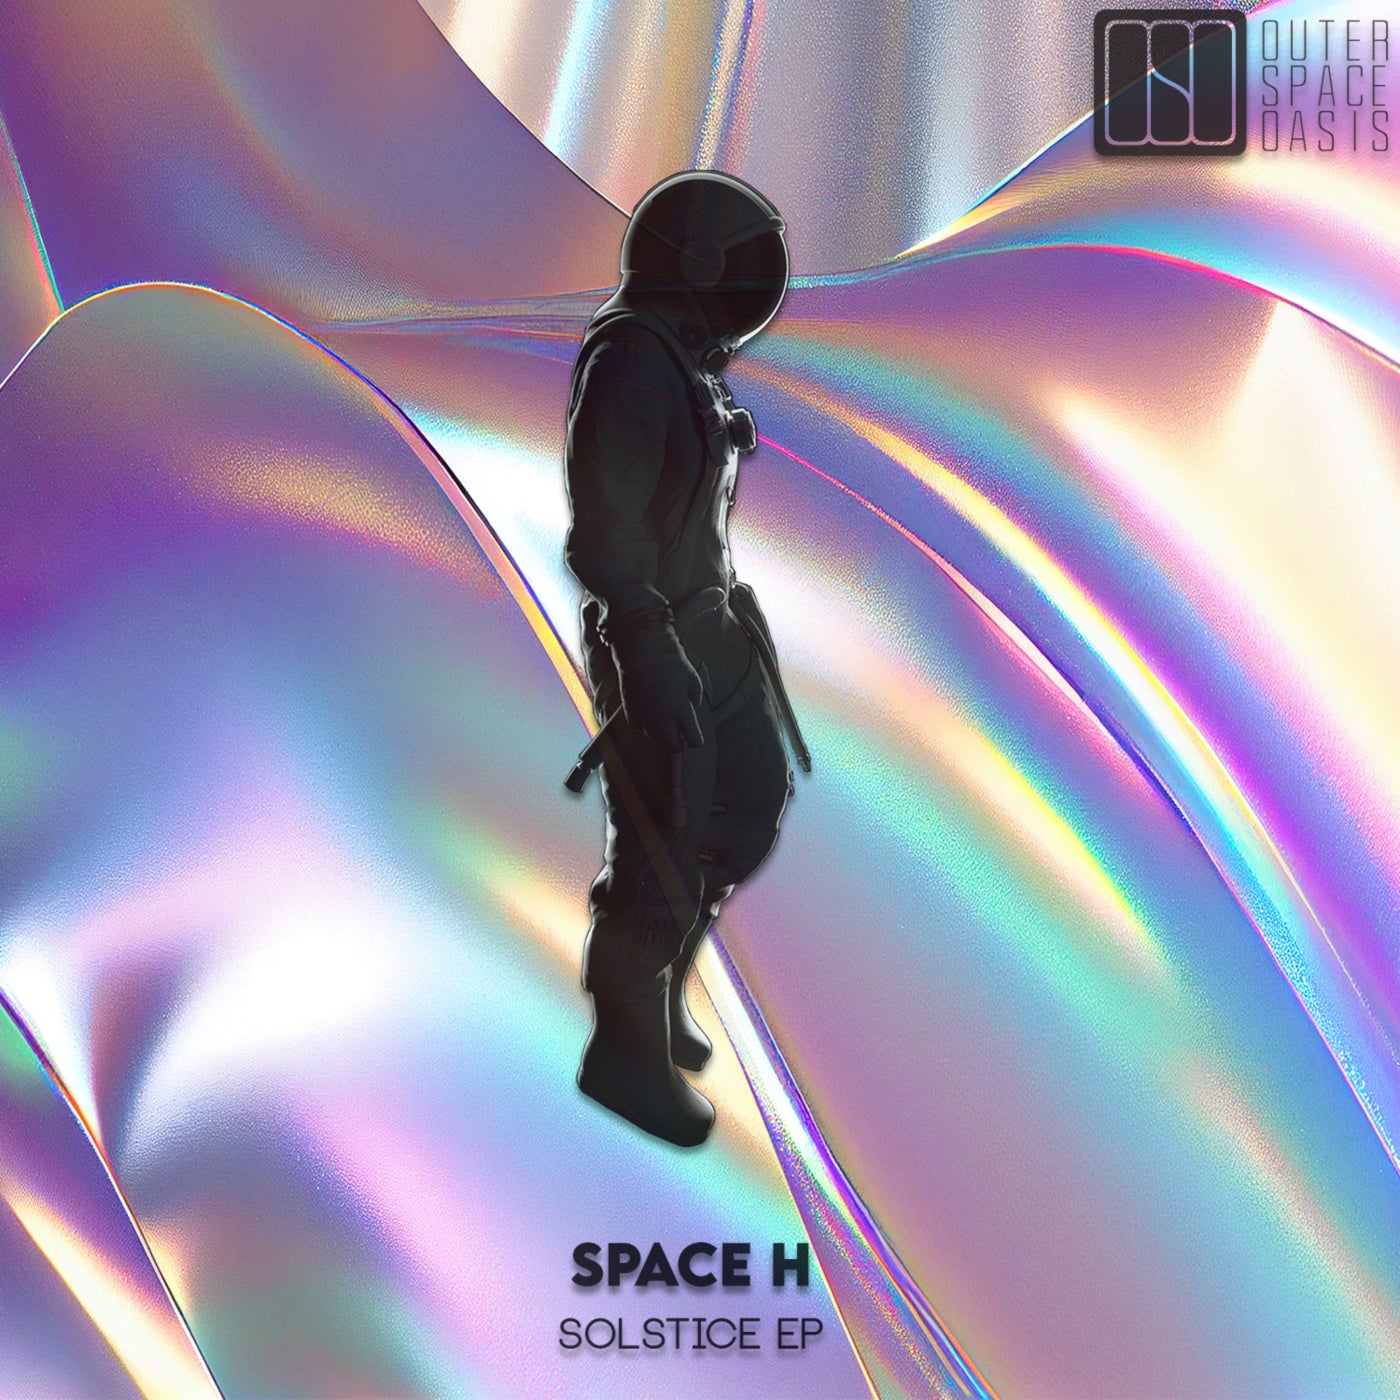 H space